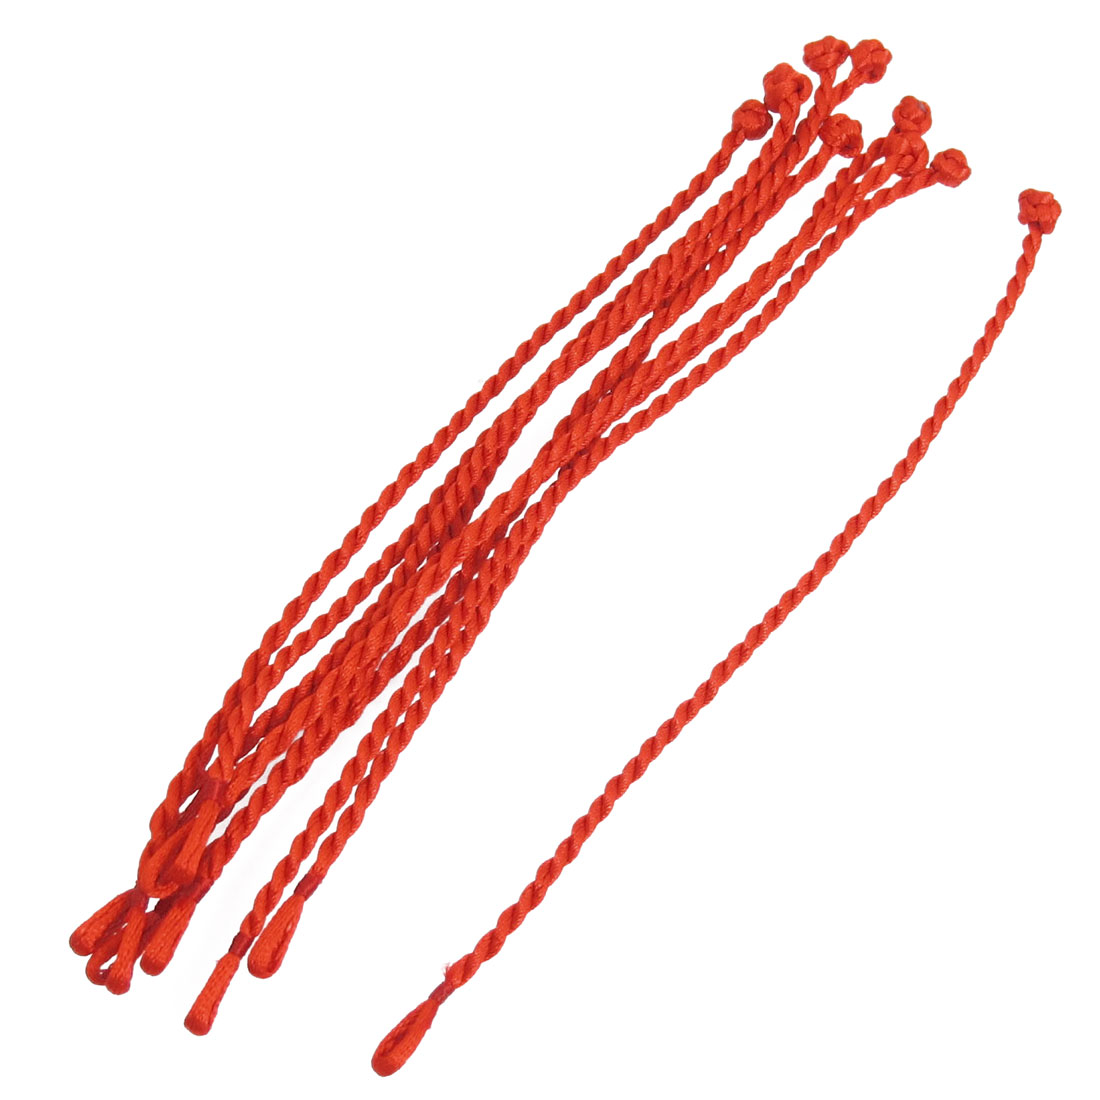 Unique Bargains 10 Pieces Handmade Red Braided String Knot End Bracelet Cords